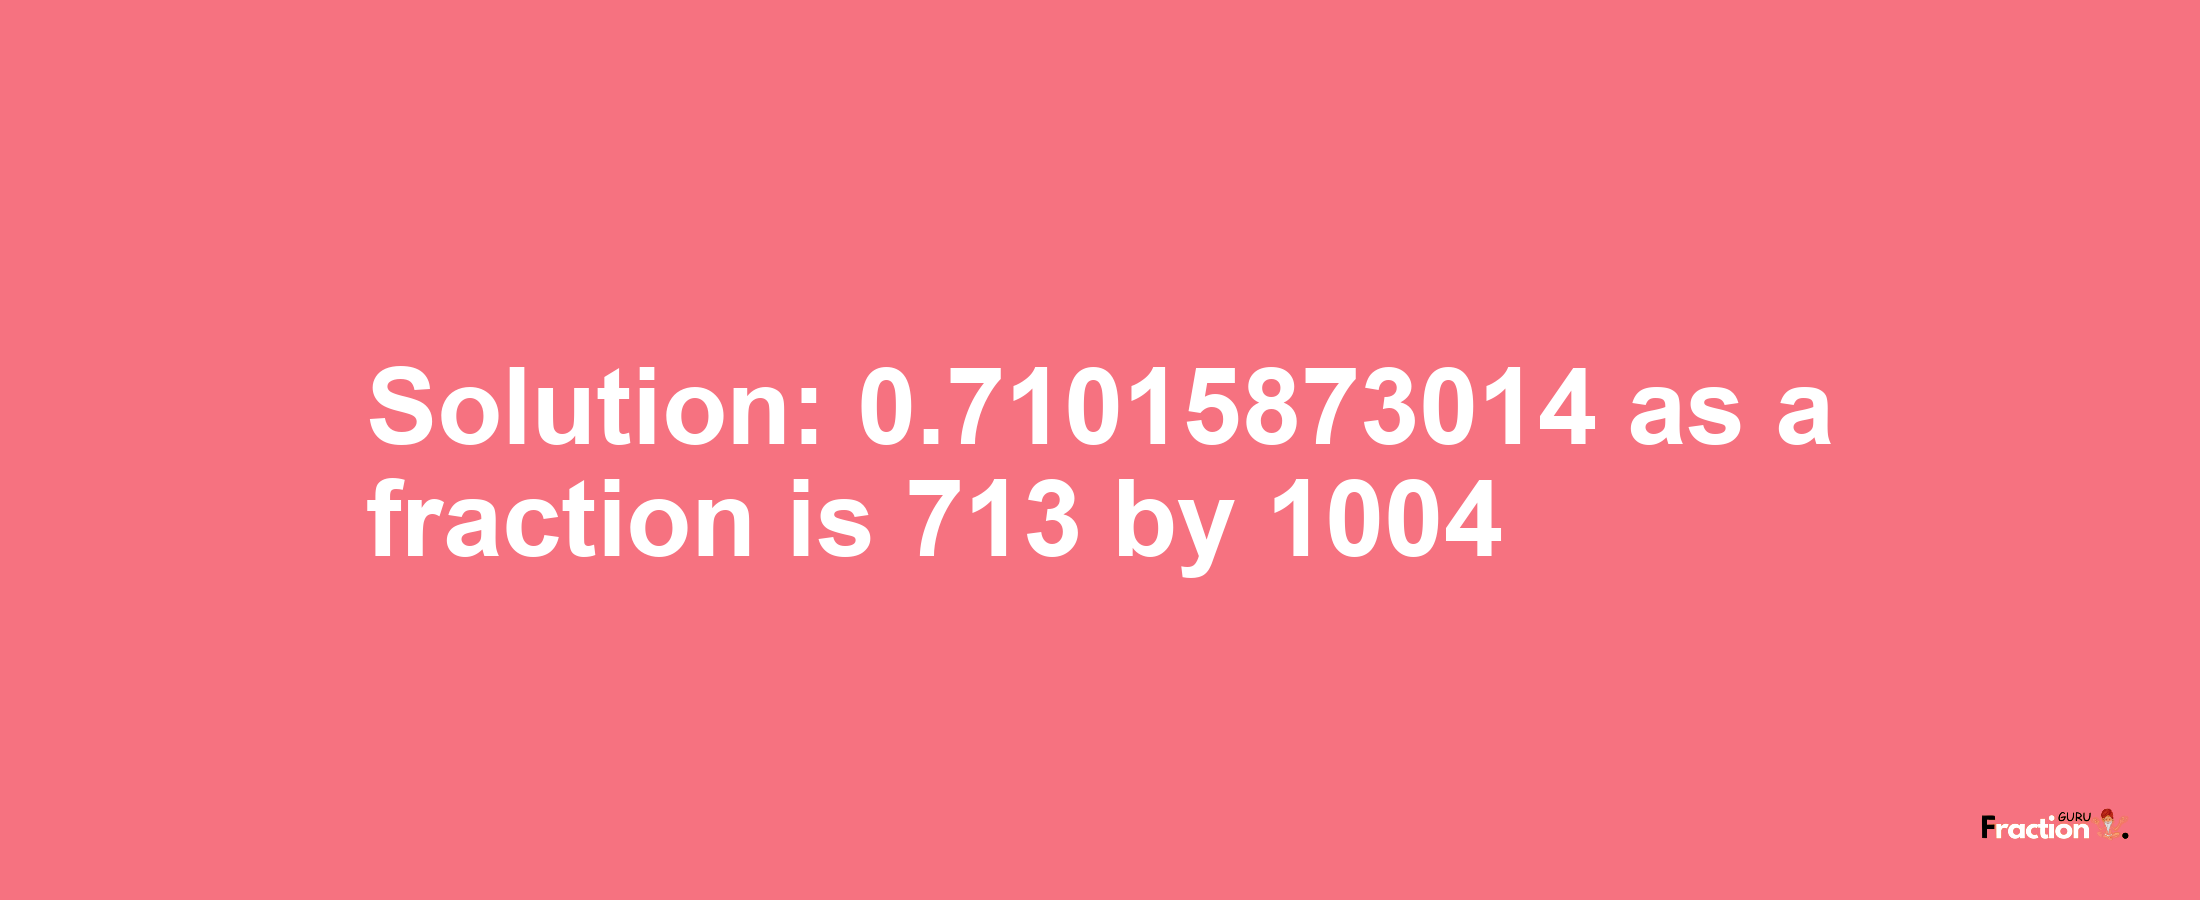 Solution:0.71015873014 as a fraction is 713/1004